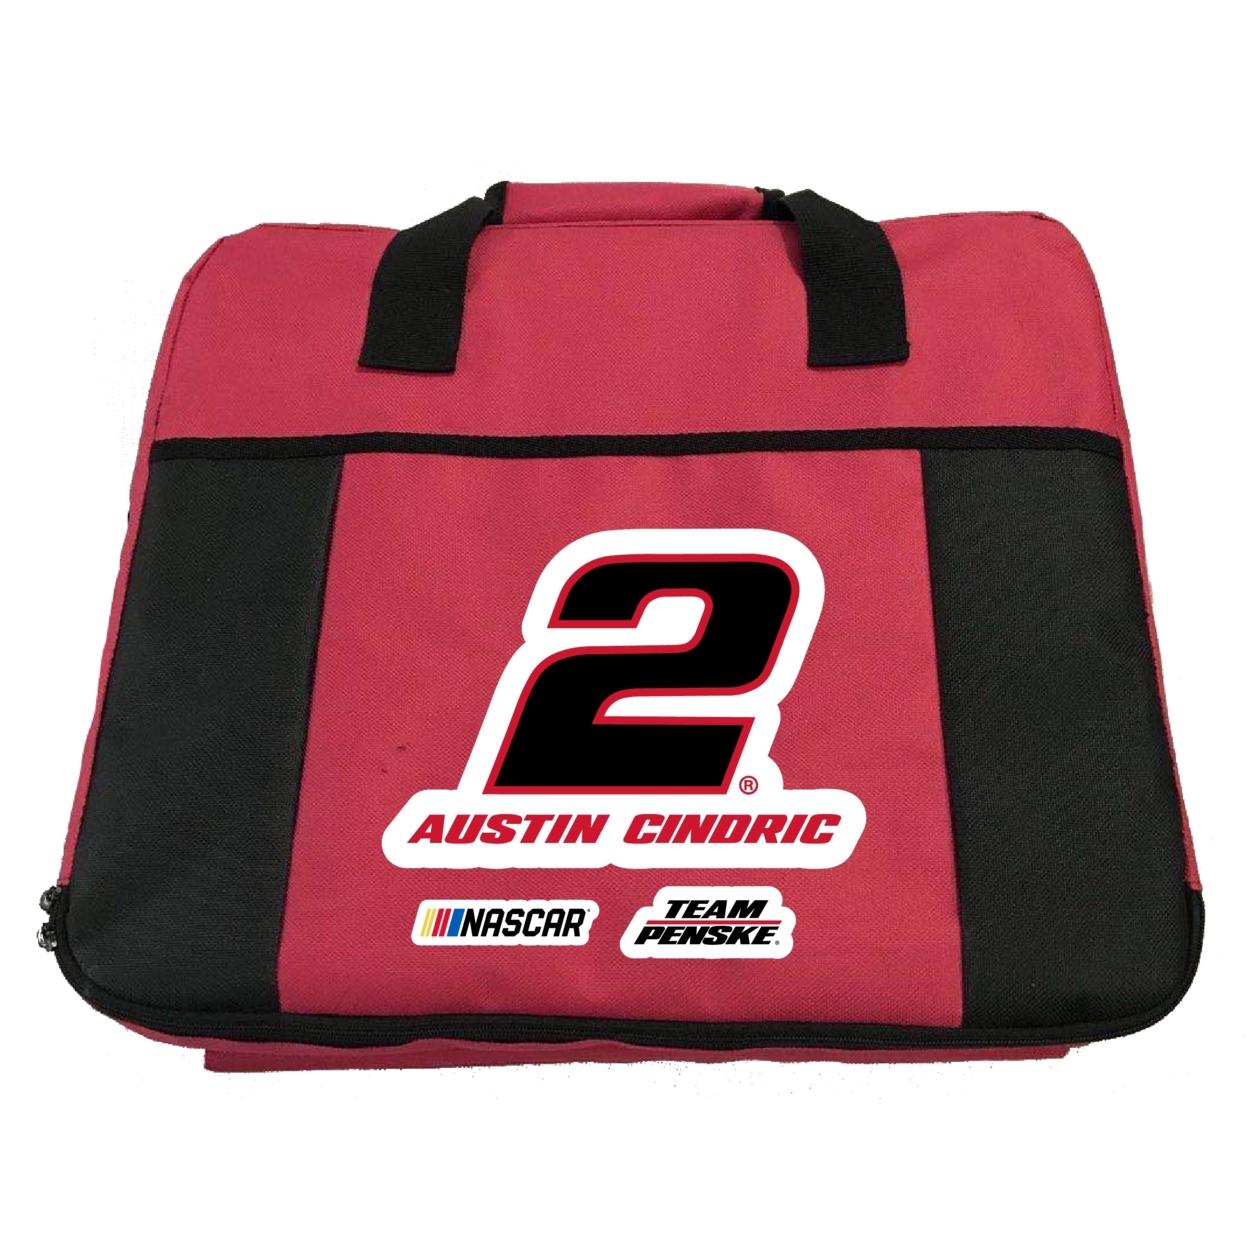 #2 Austin Cindric Officially Licensed Deluxe Seat Cushion